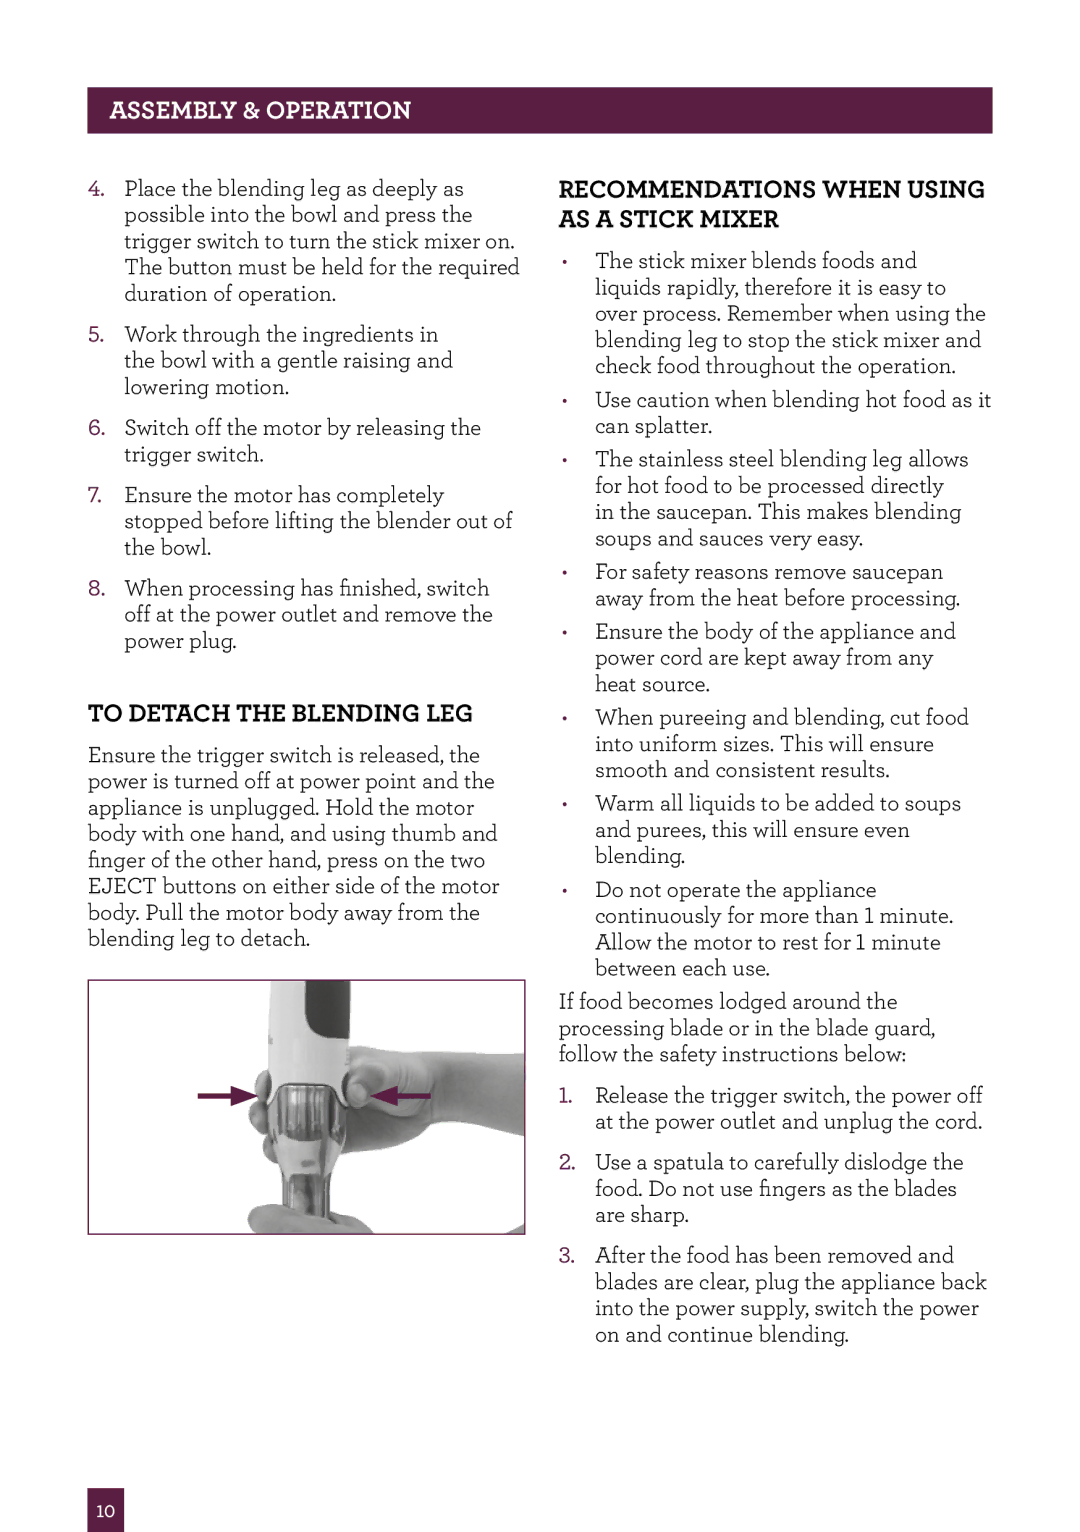 Breville BSB530 manual To detach the blending leg, Recommendations when using as a stick mixer 